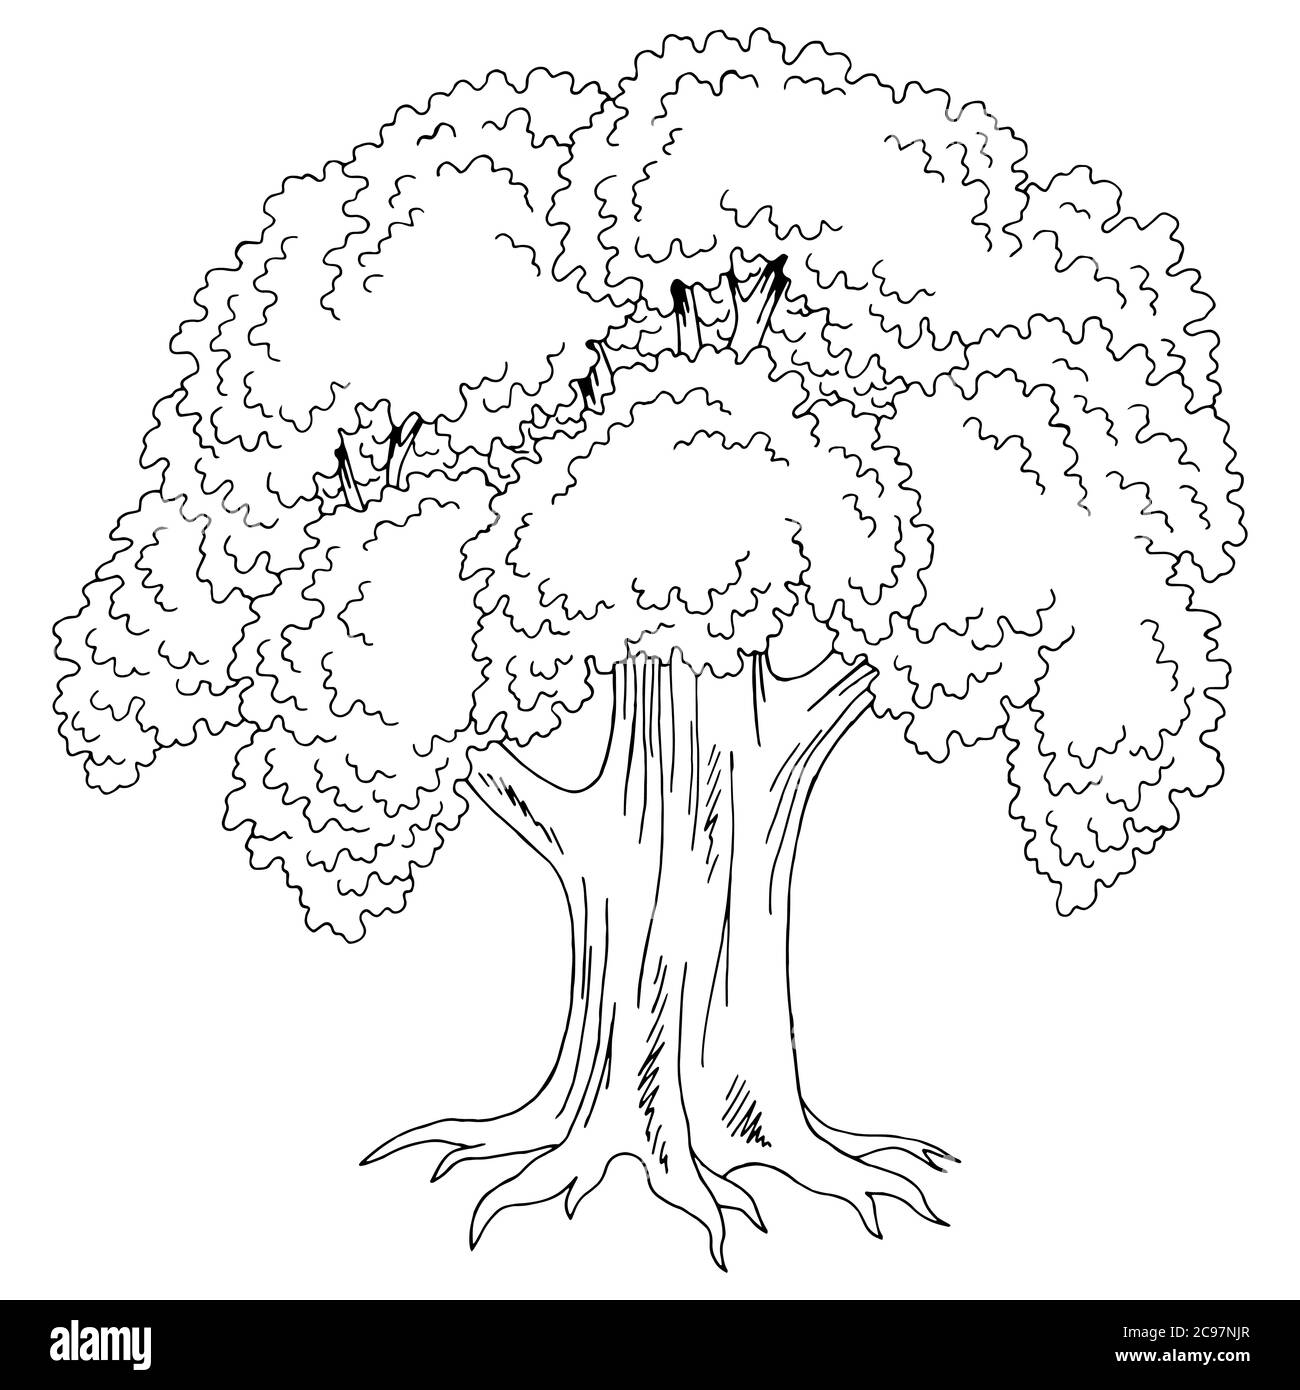 Old oak tree graphic black white isolated sketch illustration vector Stock Vector